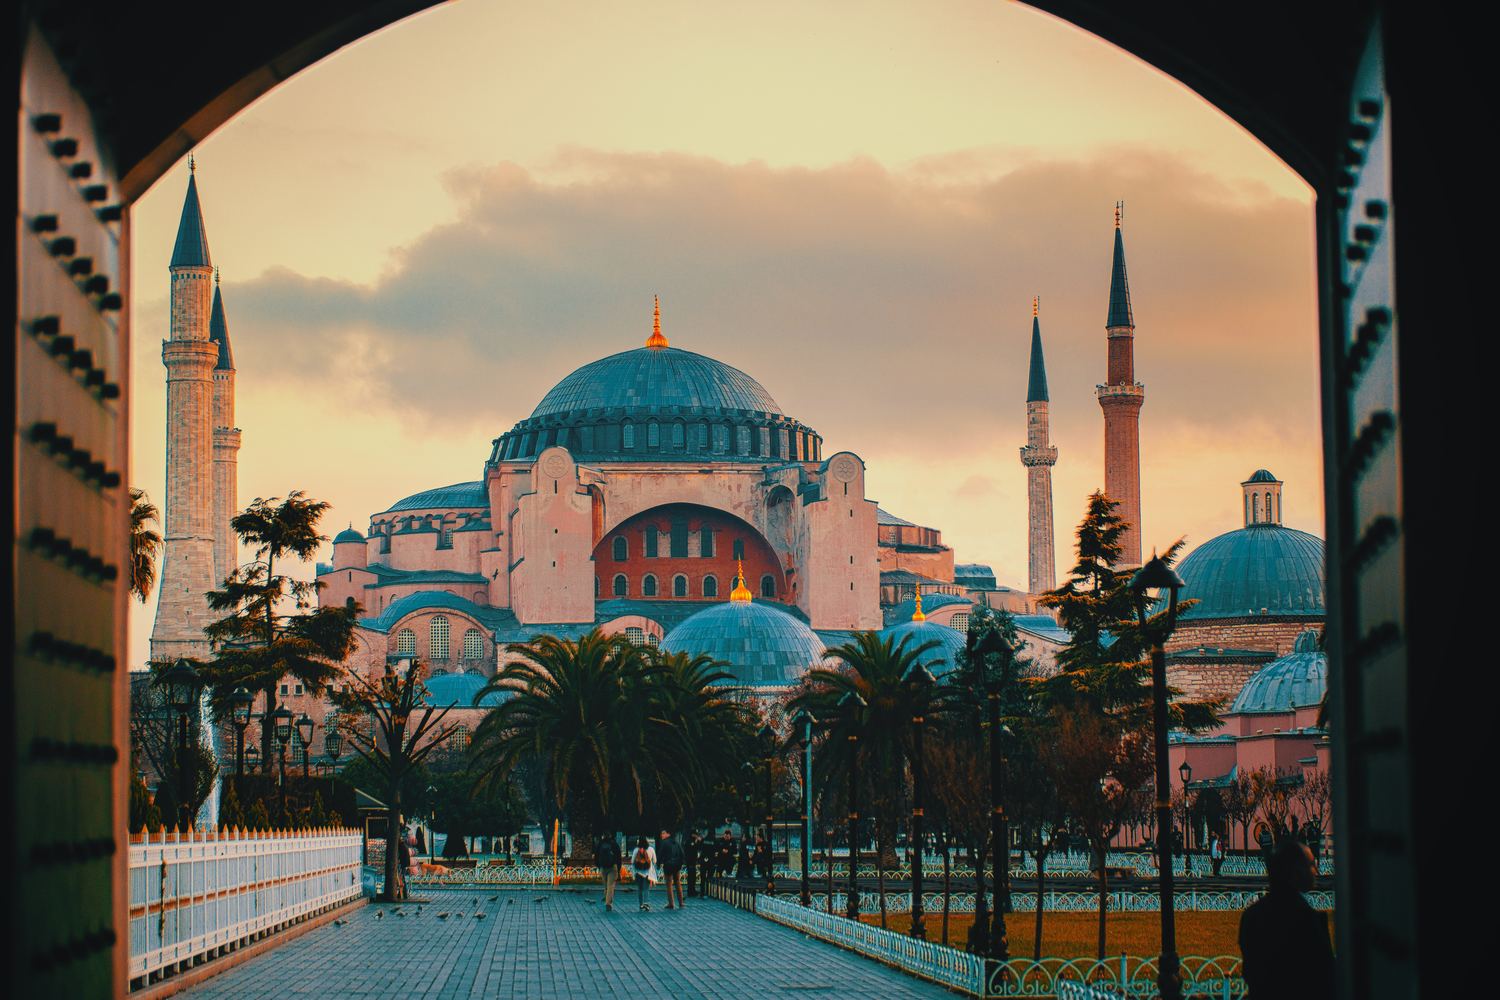 Outside view of the Hagia Sophia Mosque